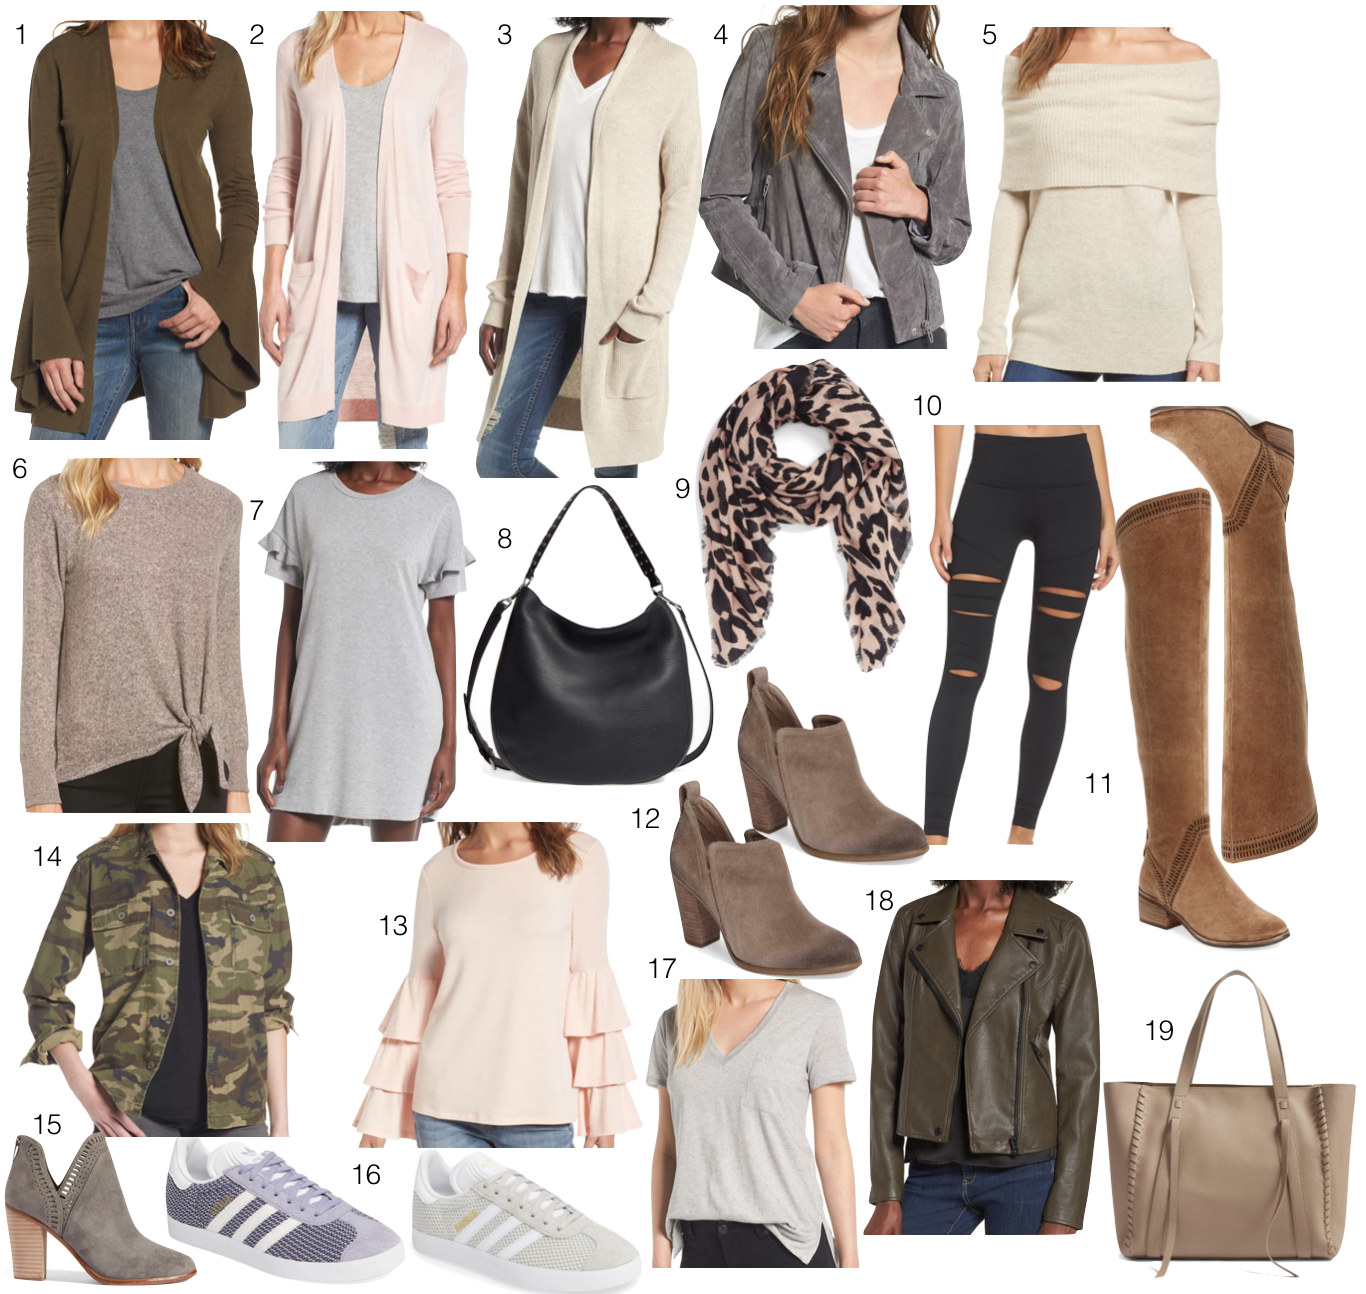 Nordstrom Anniversary Sale Top Picks and Most Versatile Items